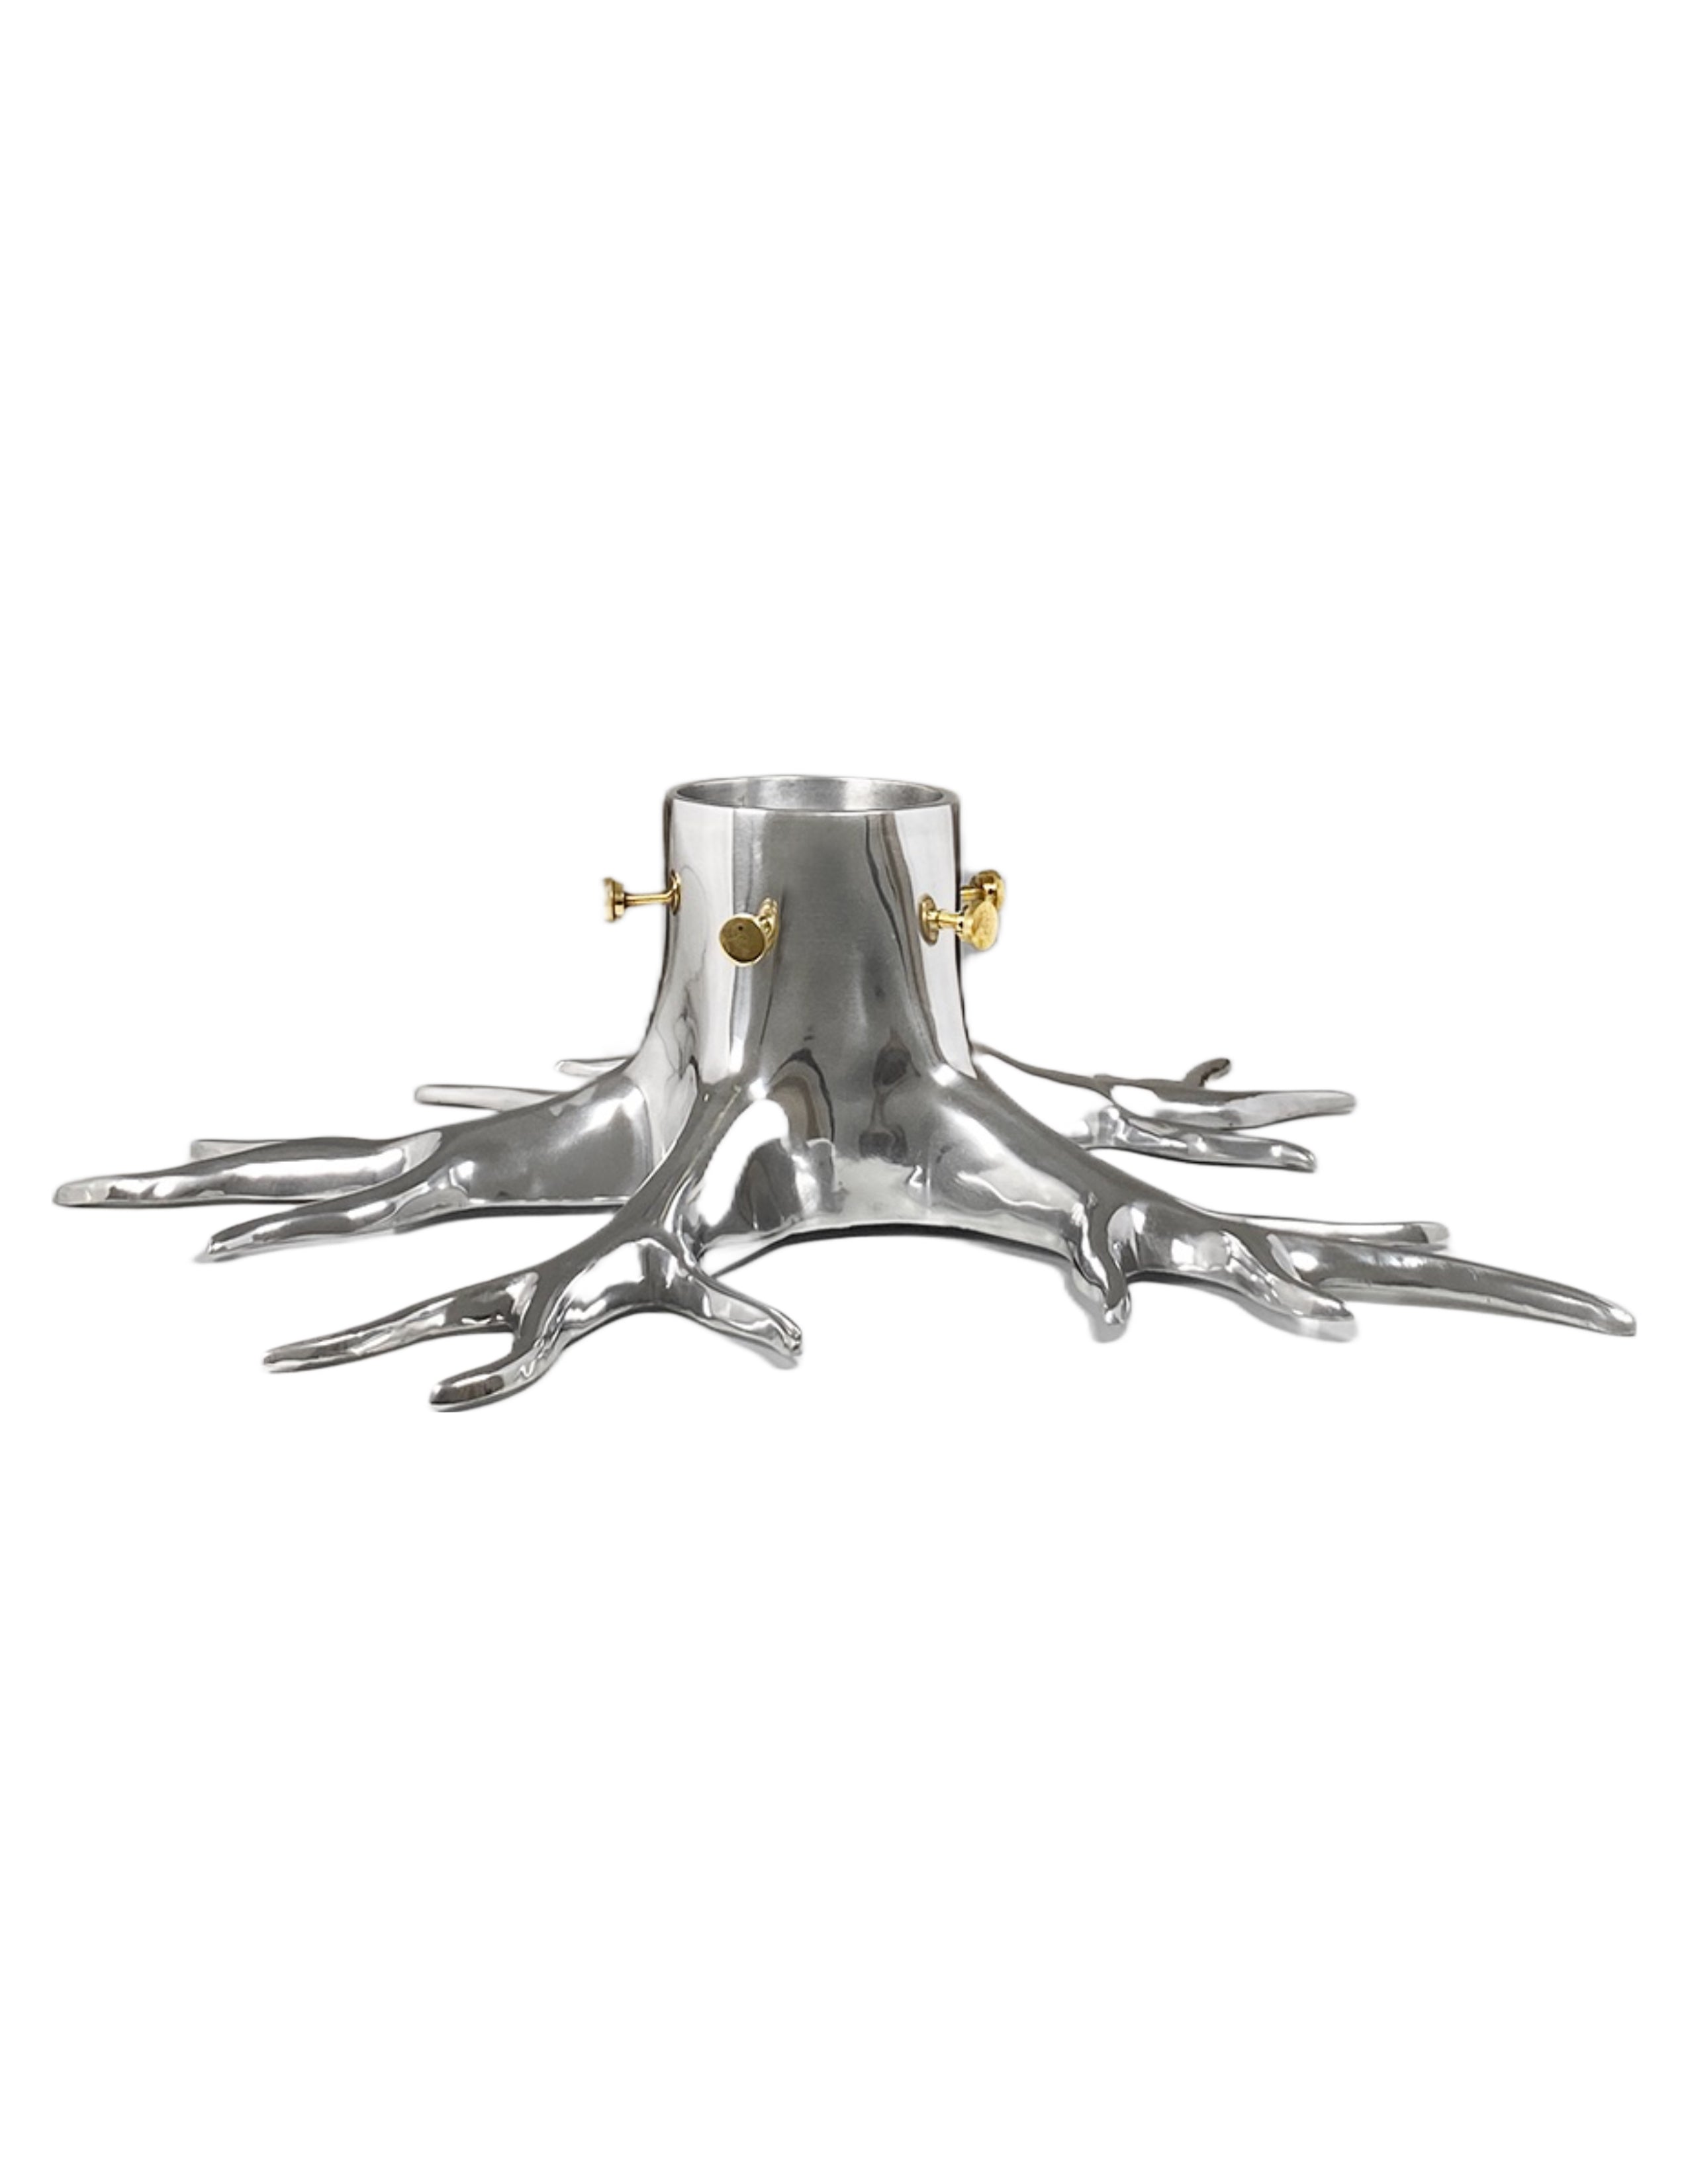 X-Large Christmas Tree Stand "The Root" - Silver